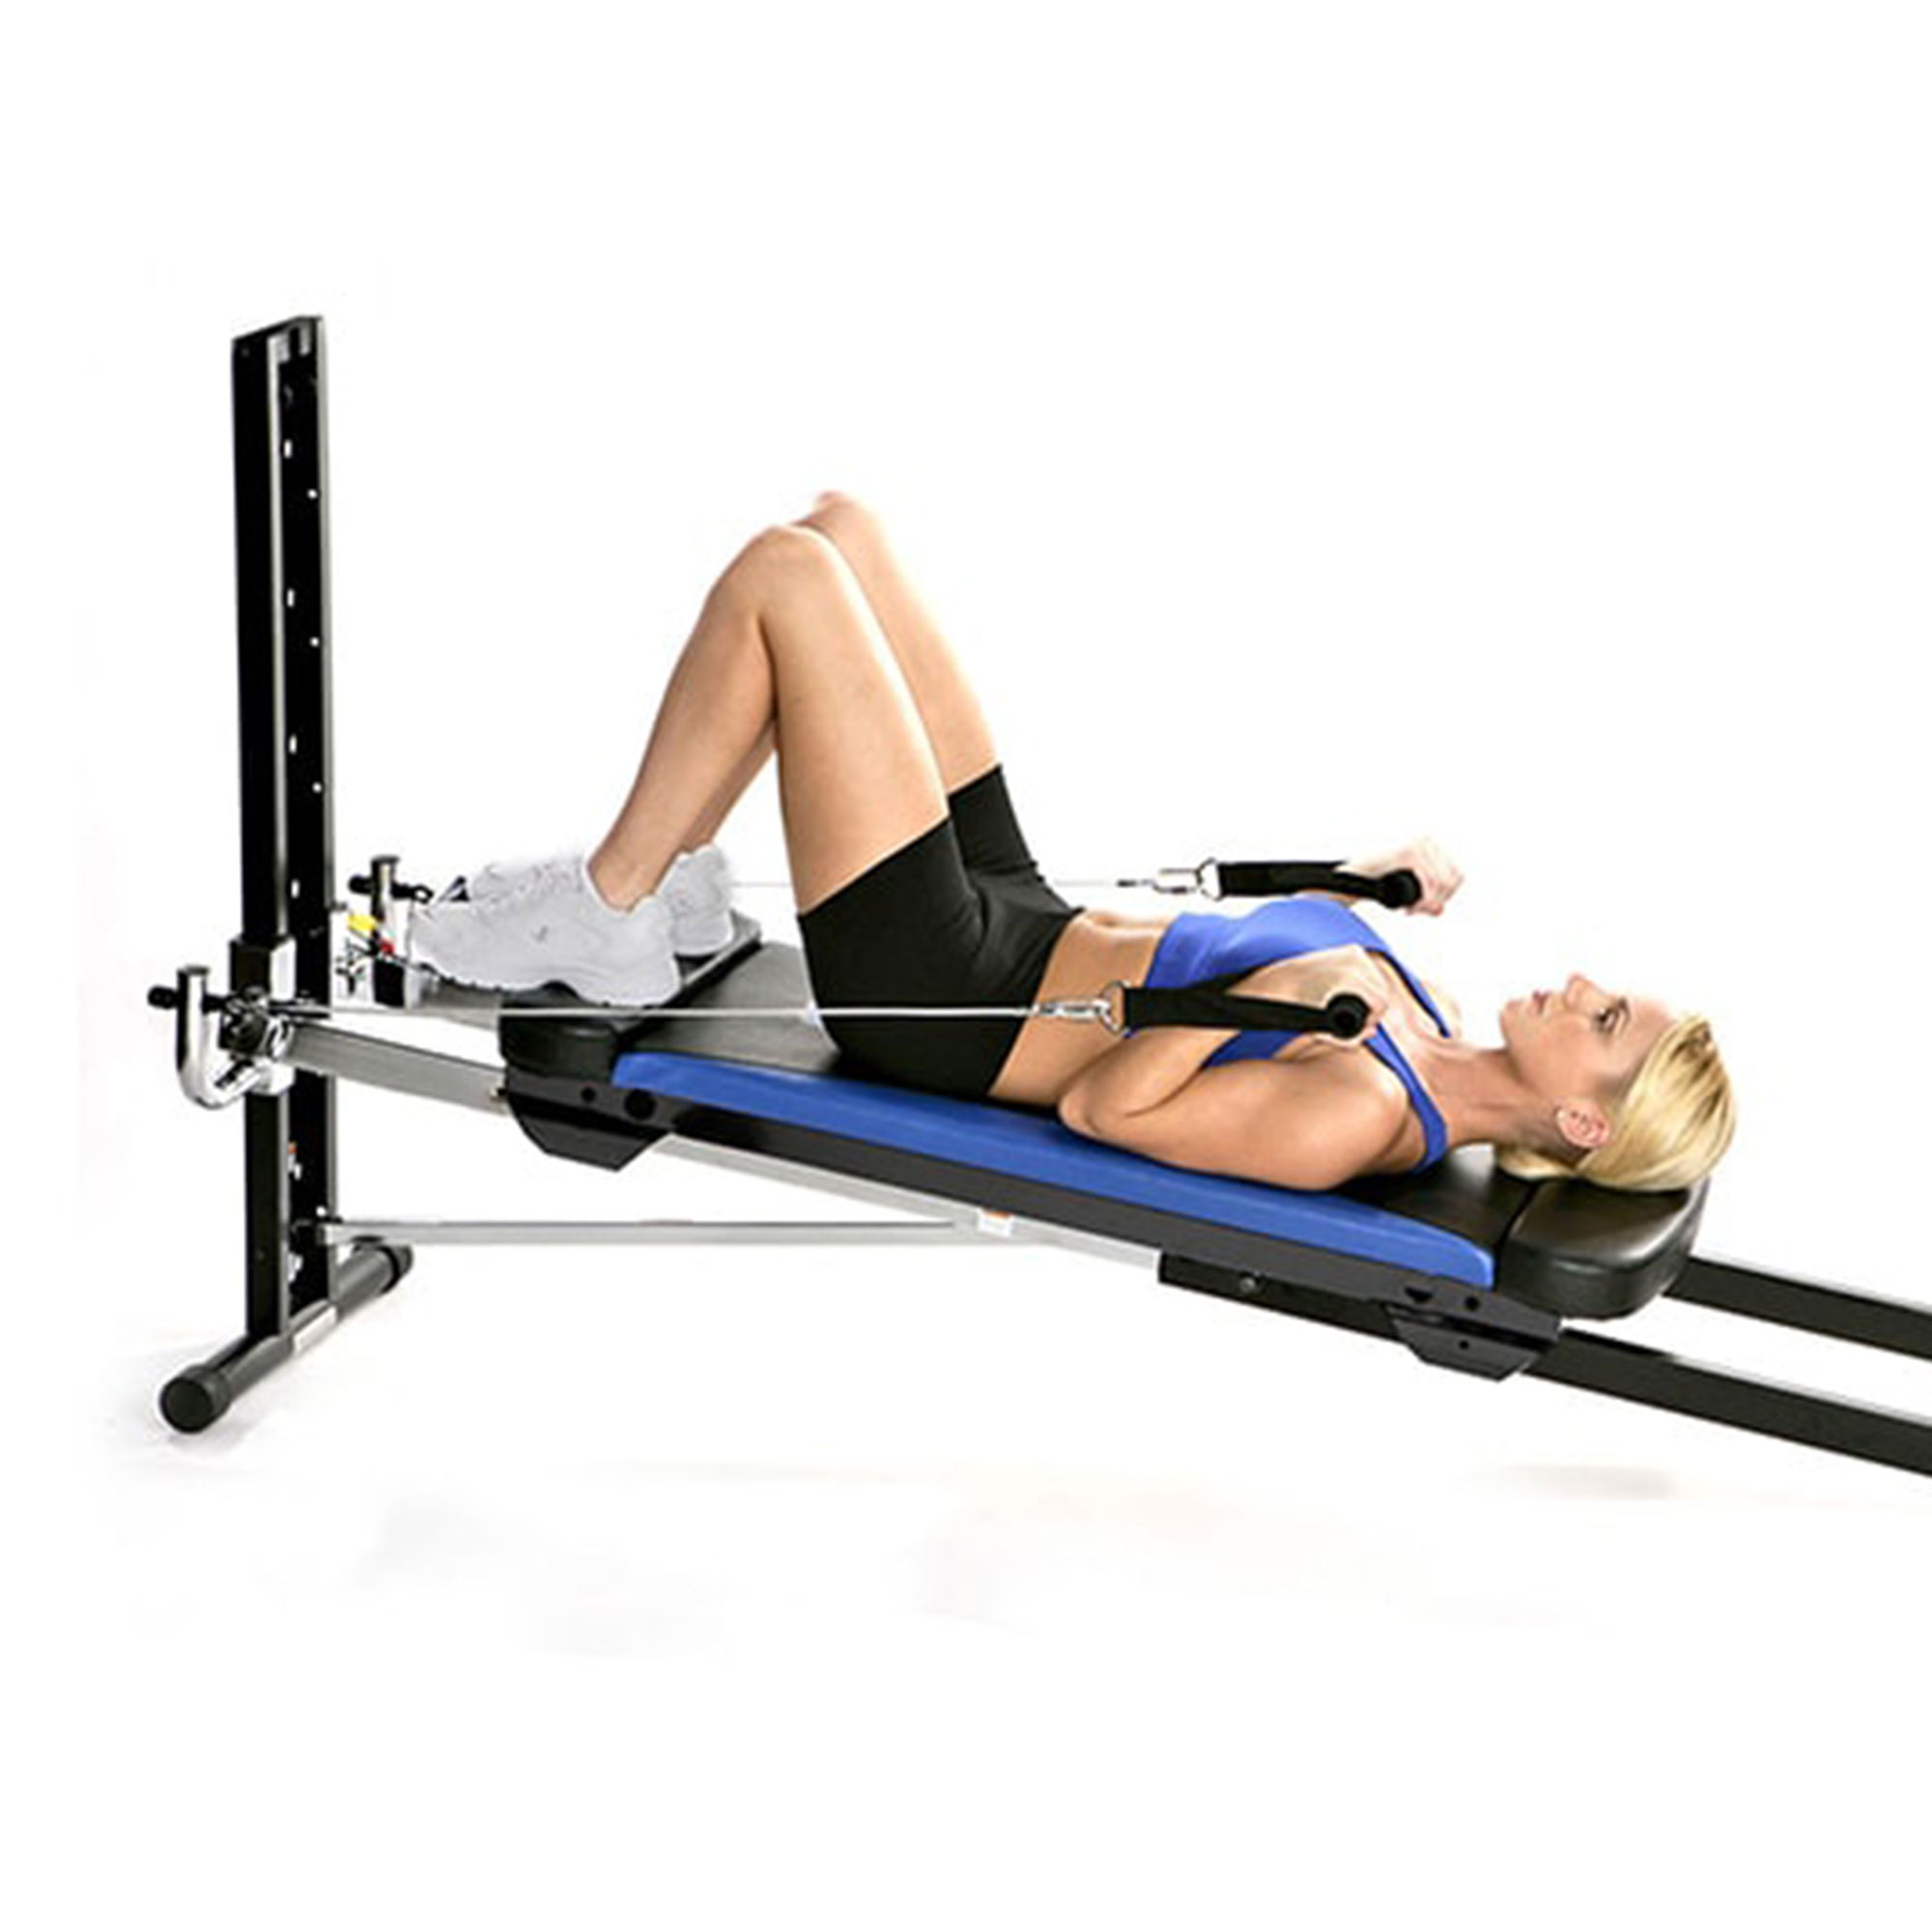 Total Gym XLS Men/Women Universal Fold Home Gym Workout Machine Plus Accessories - image 10 of 11